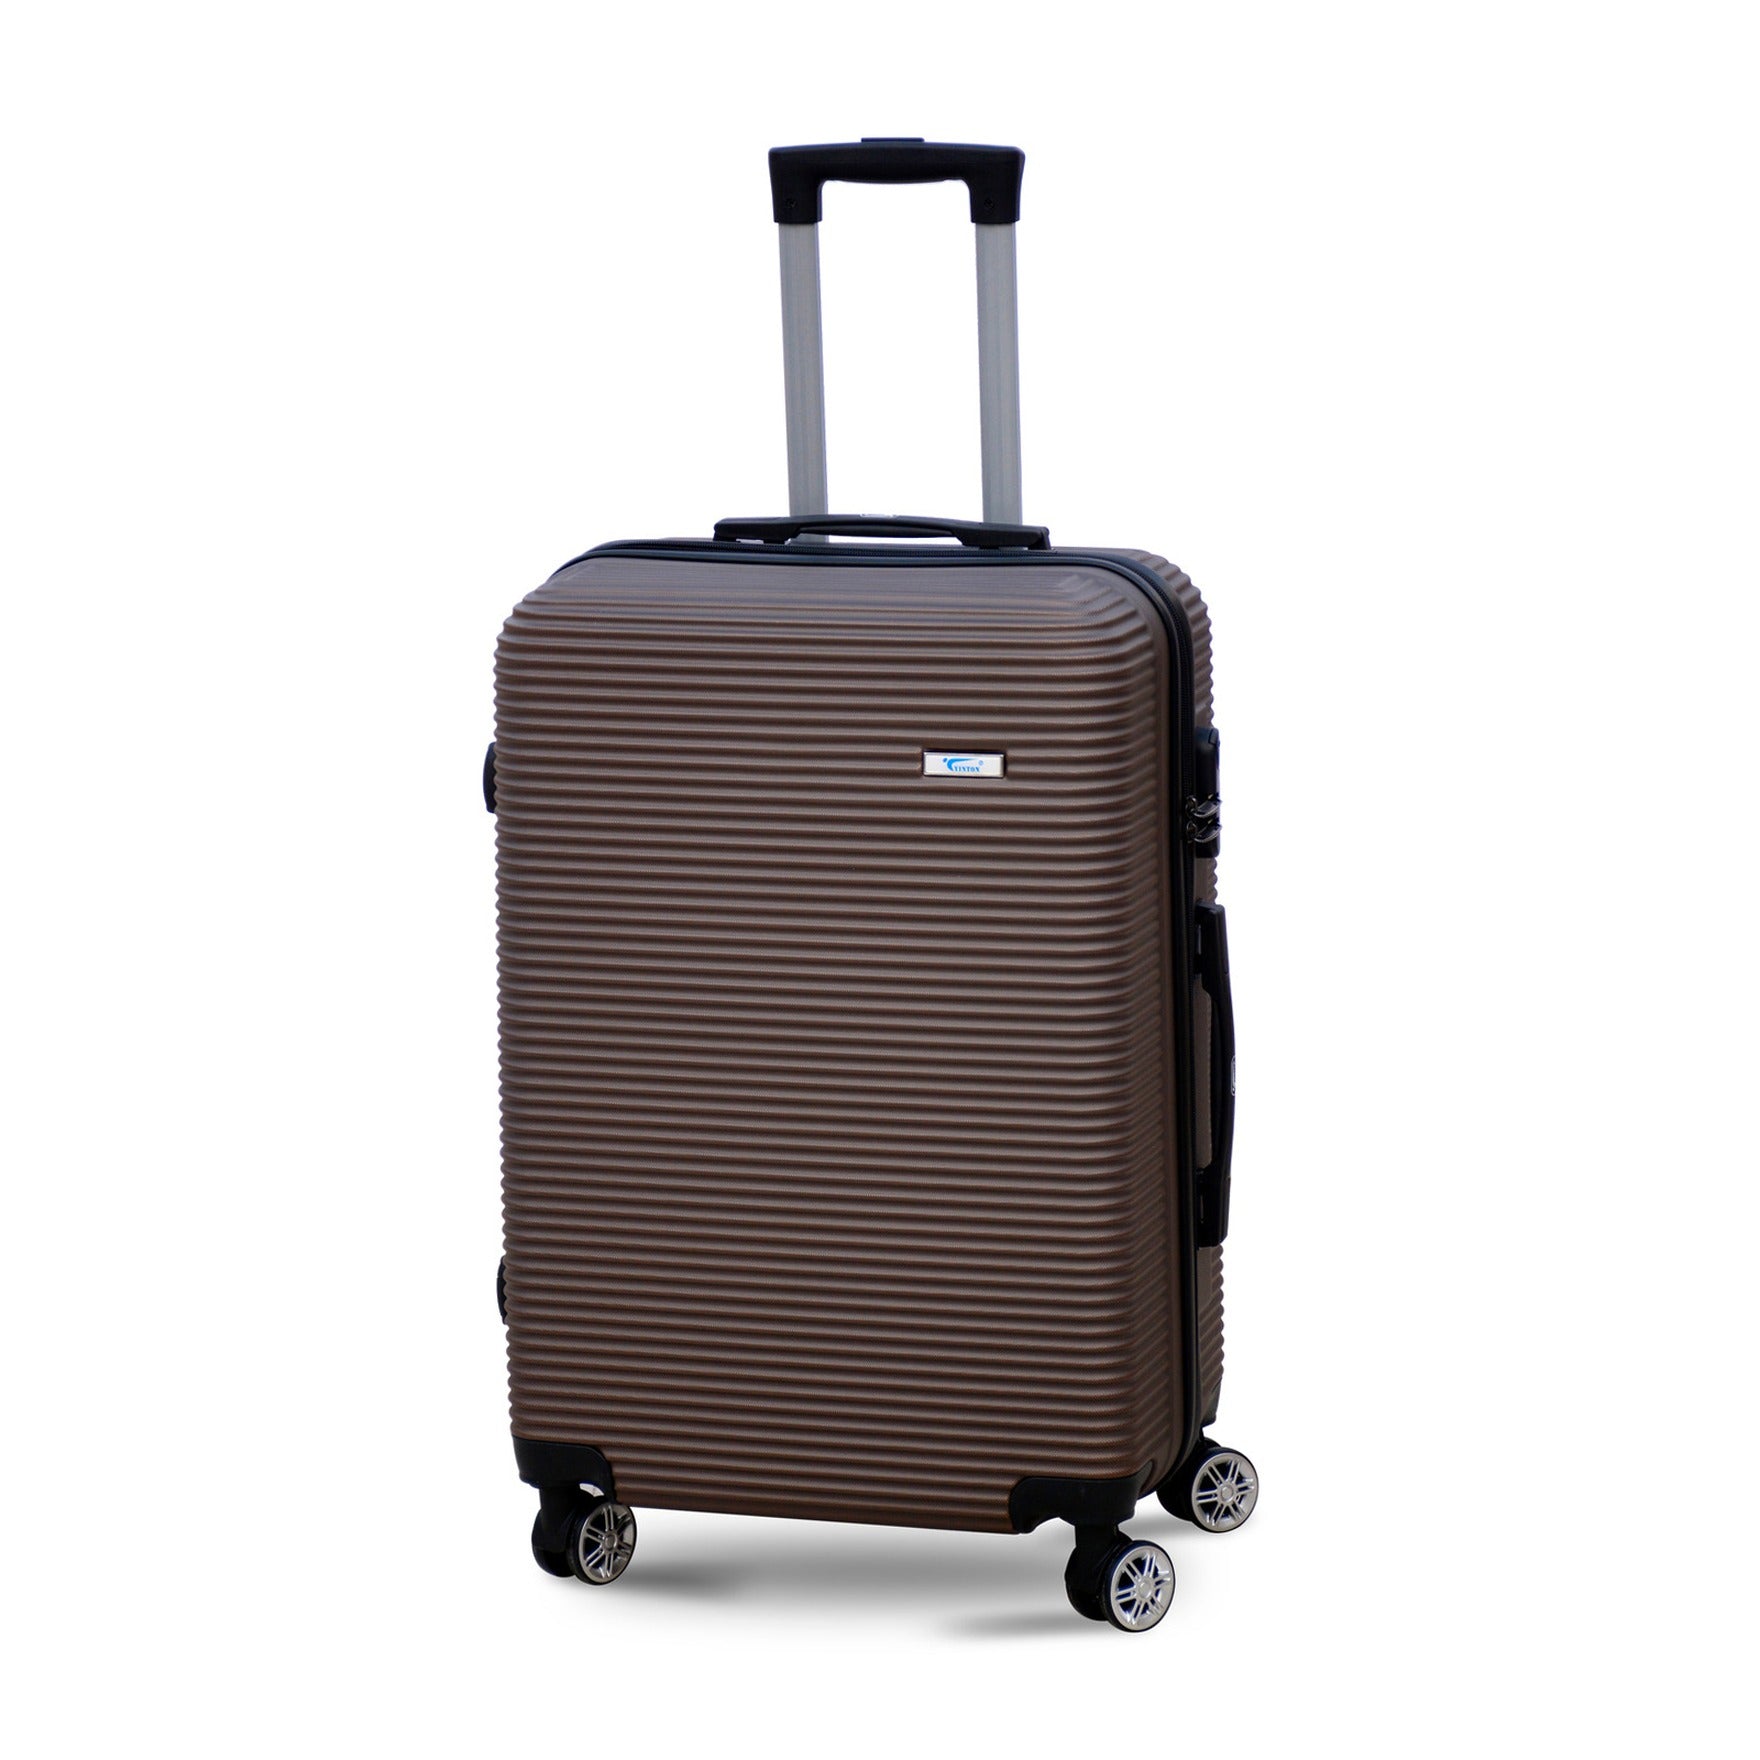 28" Coffee Colour JIAN ABS Line Luggage Lightweight Hard Case Trolley Bag With Spinner Wheel